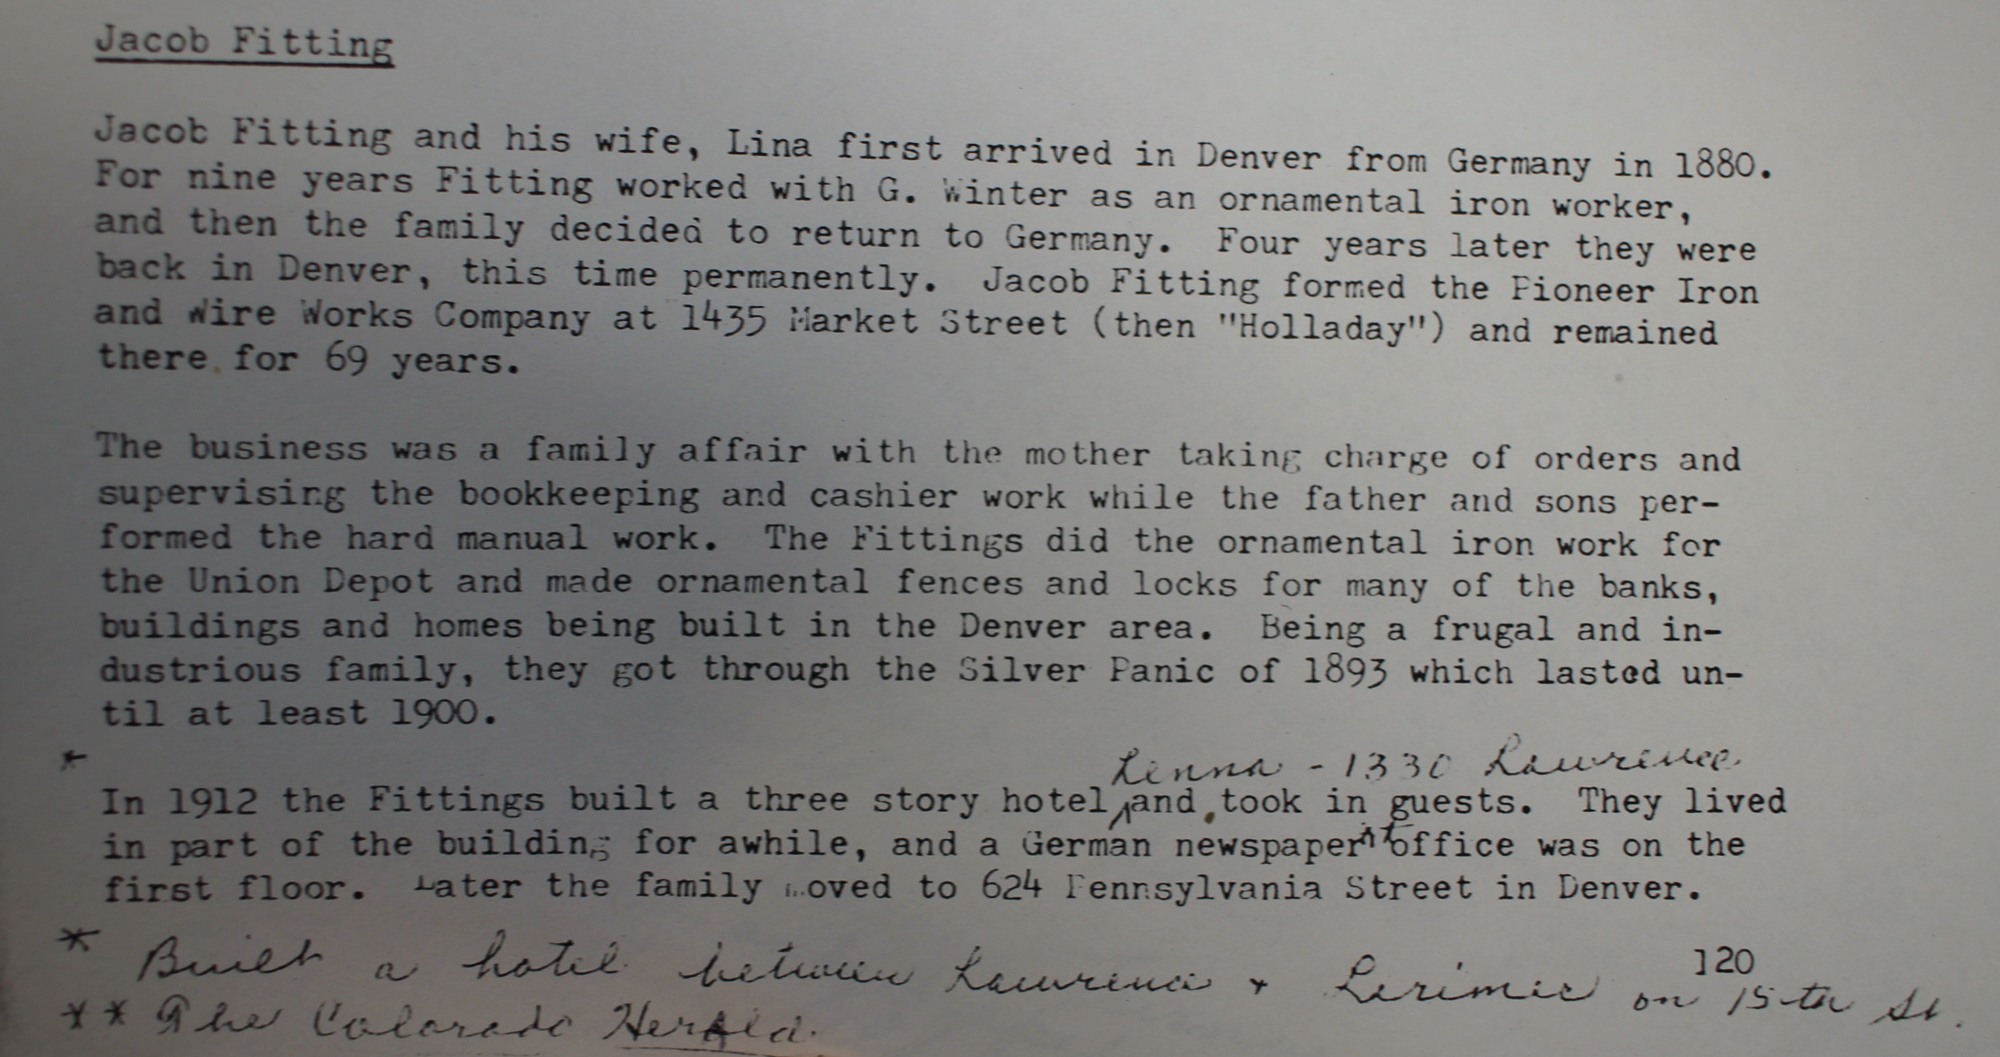 Dauth Family Archive - Circa 1970s - Isabella Fraser Research On Jacob And Lina Fitting -